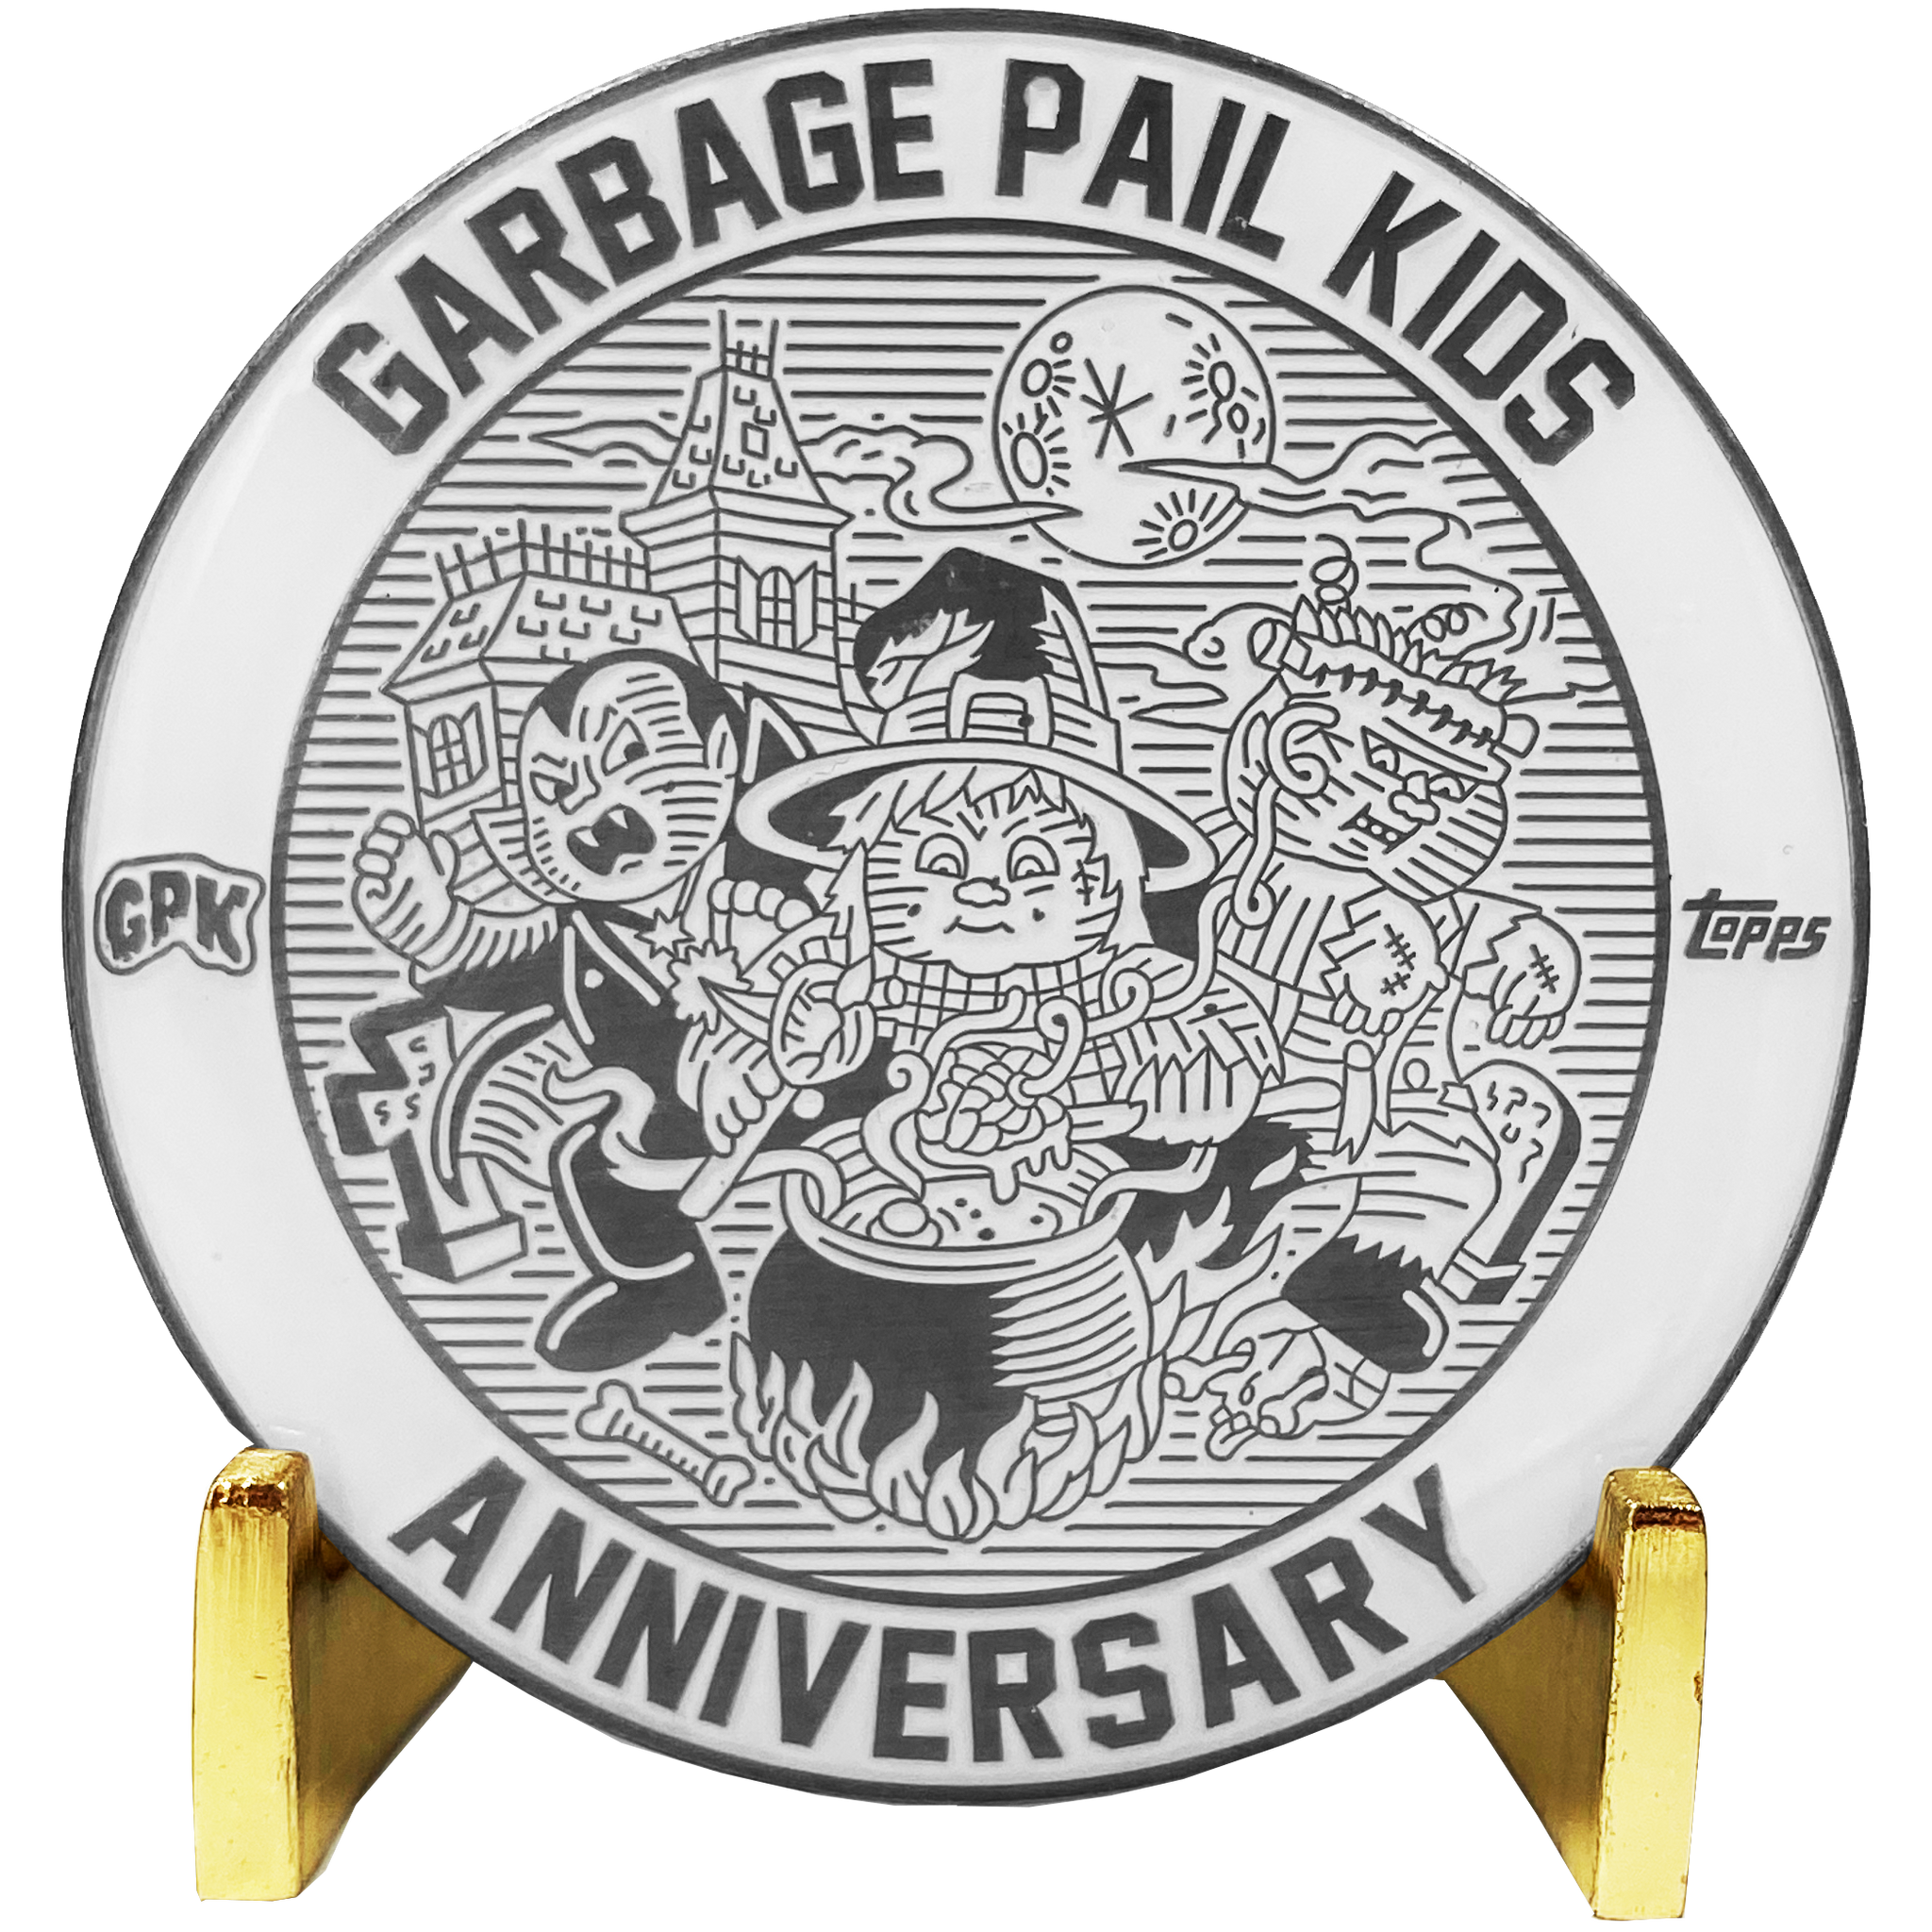 Coin 002 Nickel plated white cloisonné Topps Officially Licensed challenge coin Garbage Pail Kids GPK Nation